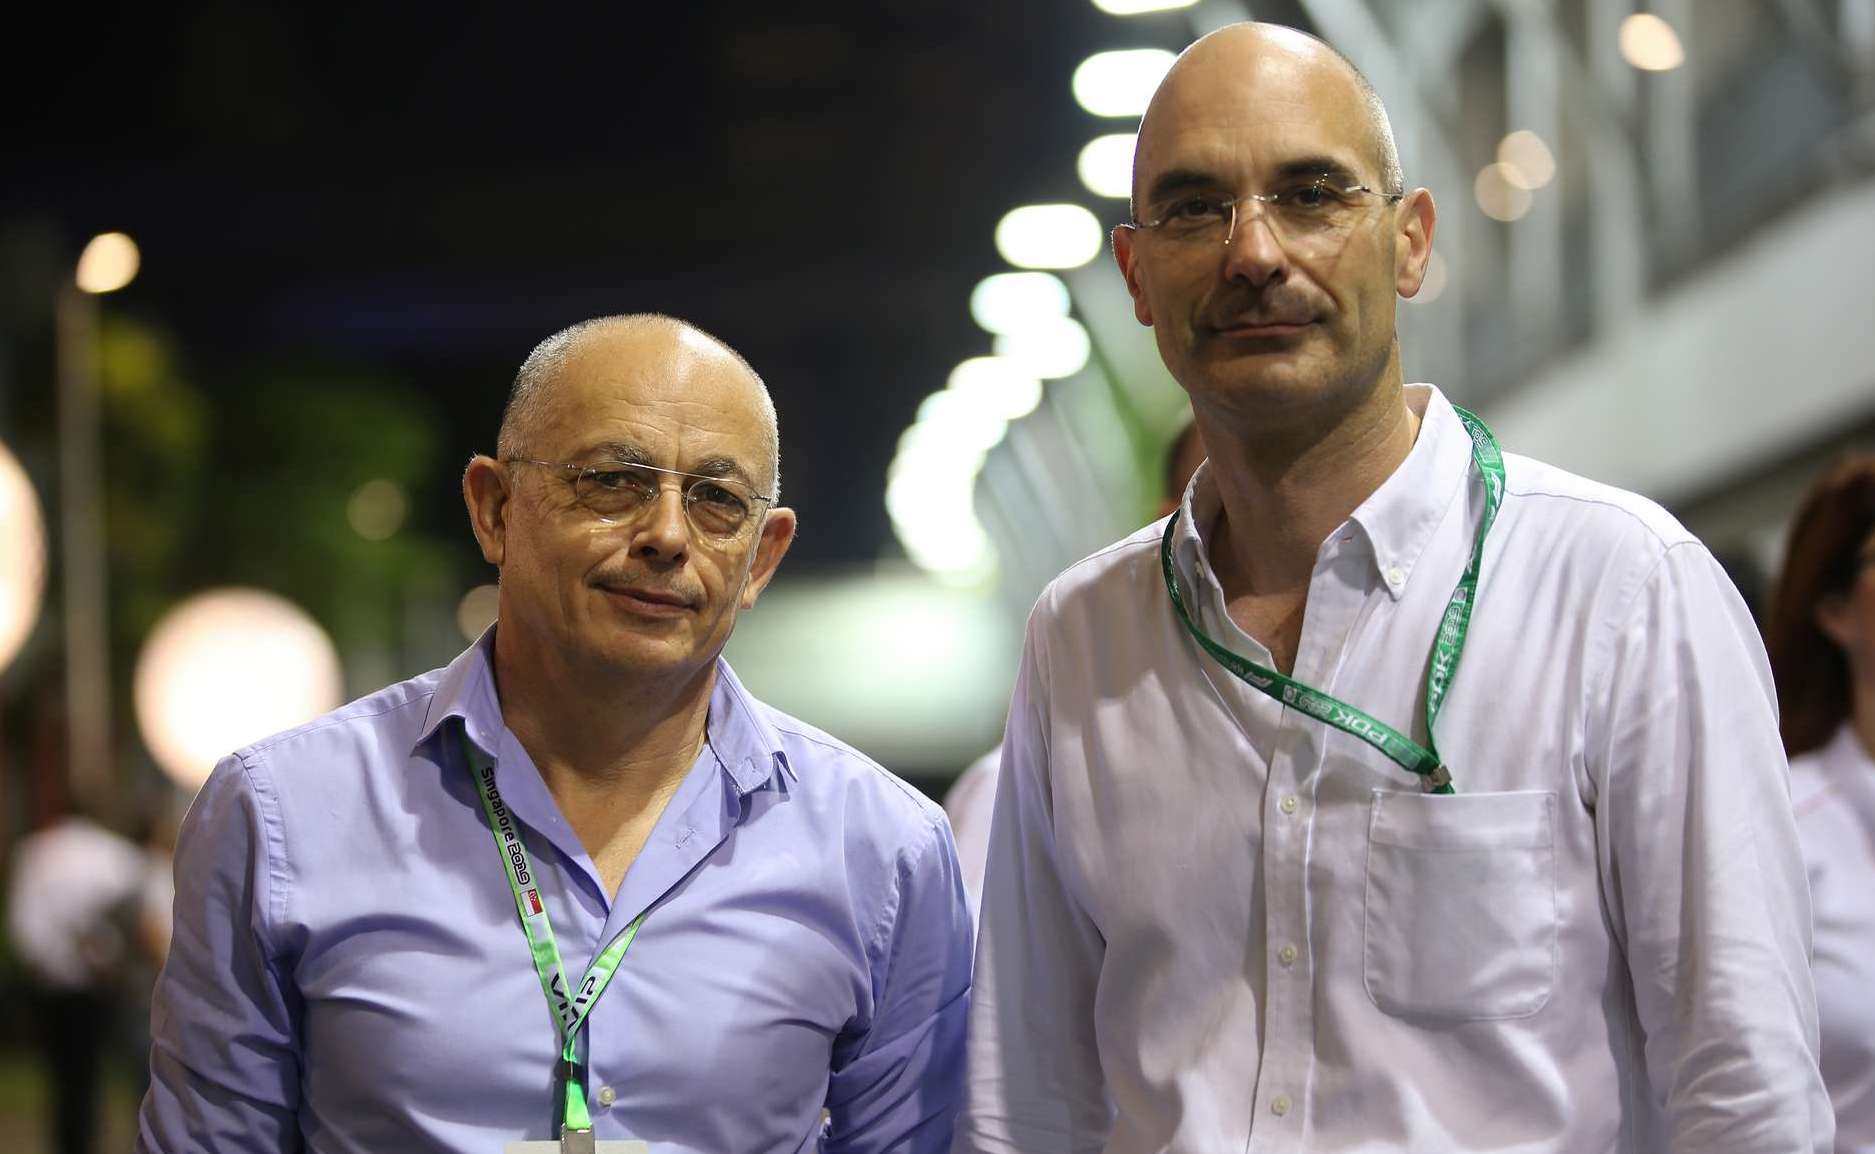 Panthera Team Asia co-founders Michel Orts (left) and Benjamin Durand. Photo: Handout